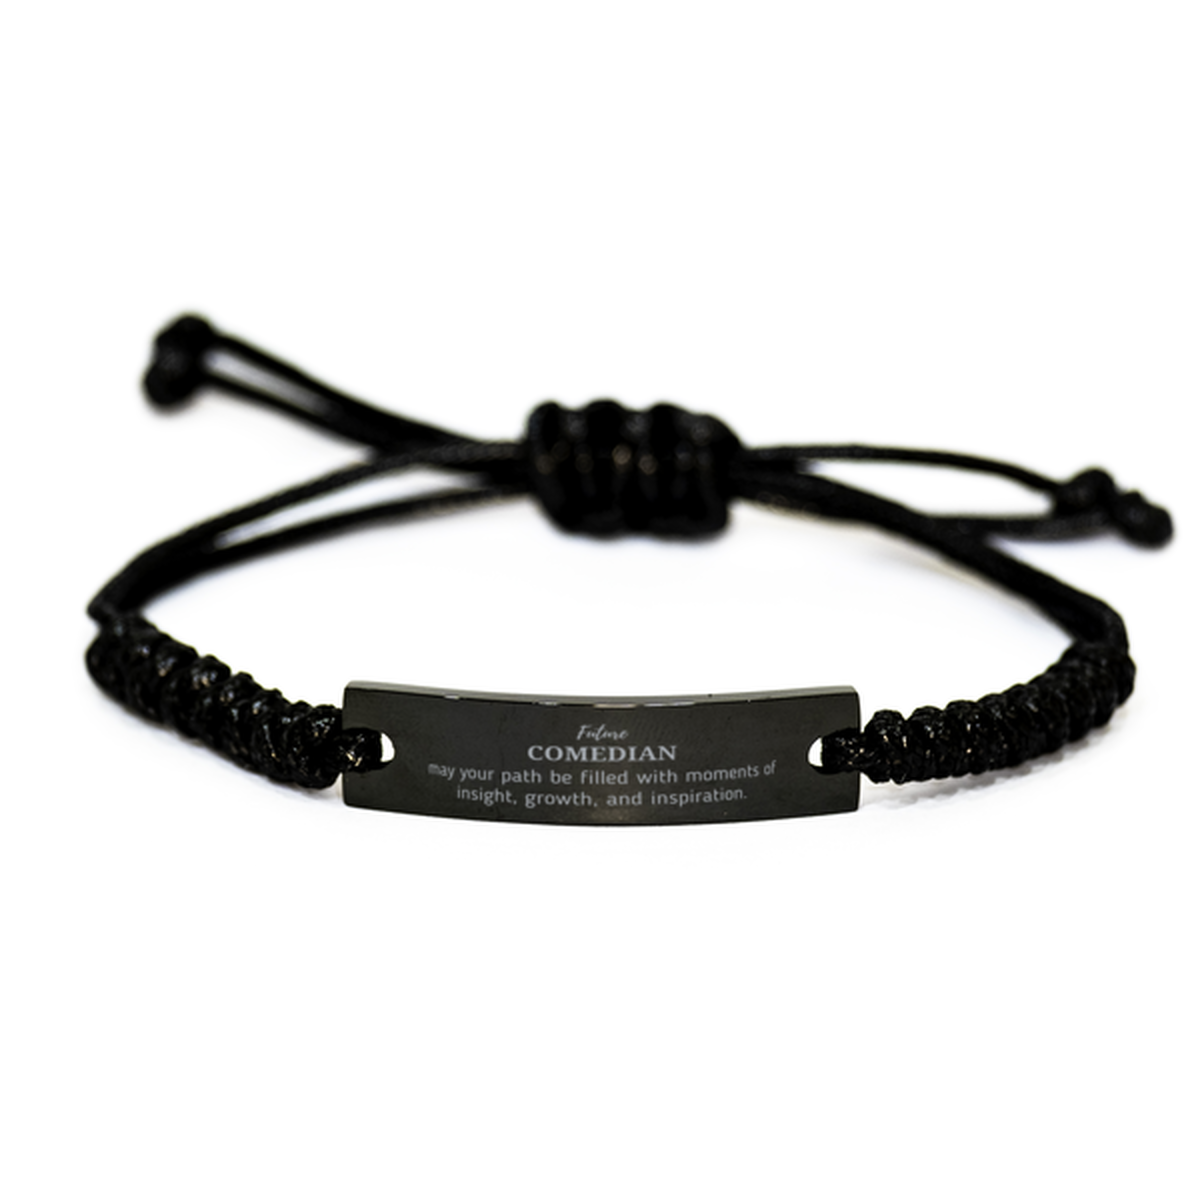 Future Comedian Gifts, May your path be filled with moments of insight, Graduation Gifts for New Comedian, Christmas Unique Black Rope Bracelet For Men, Women, Friends